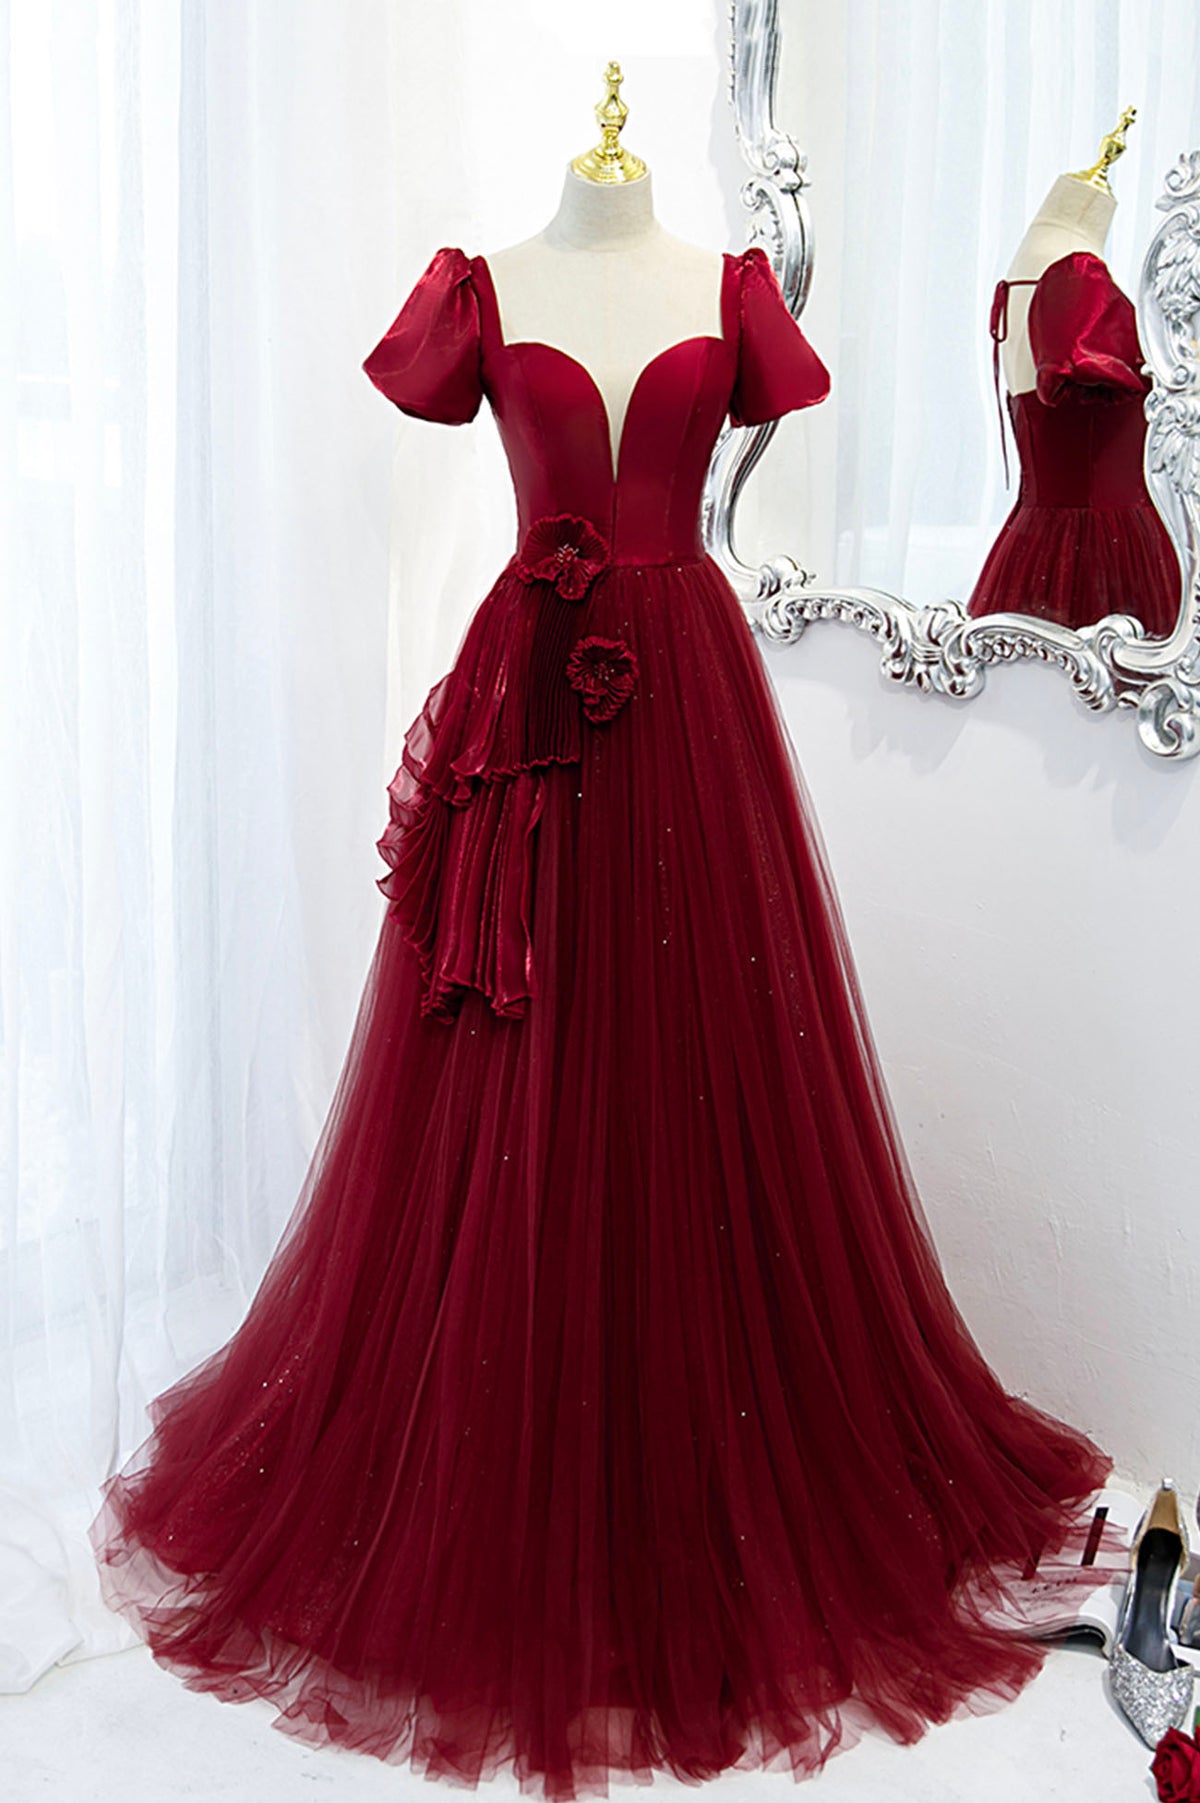 Burgundy Satin Tulle Long Prom Dress, A-Line Short Sleeve Evening Party Dress